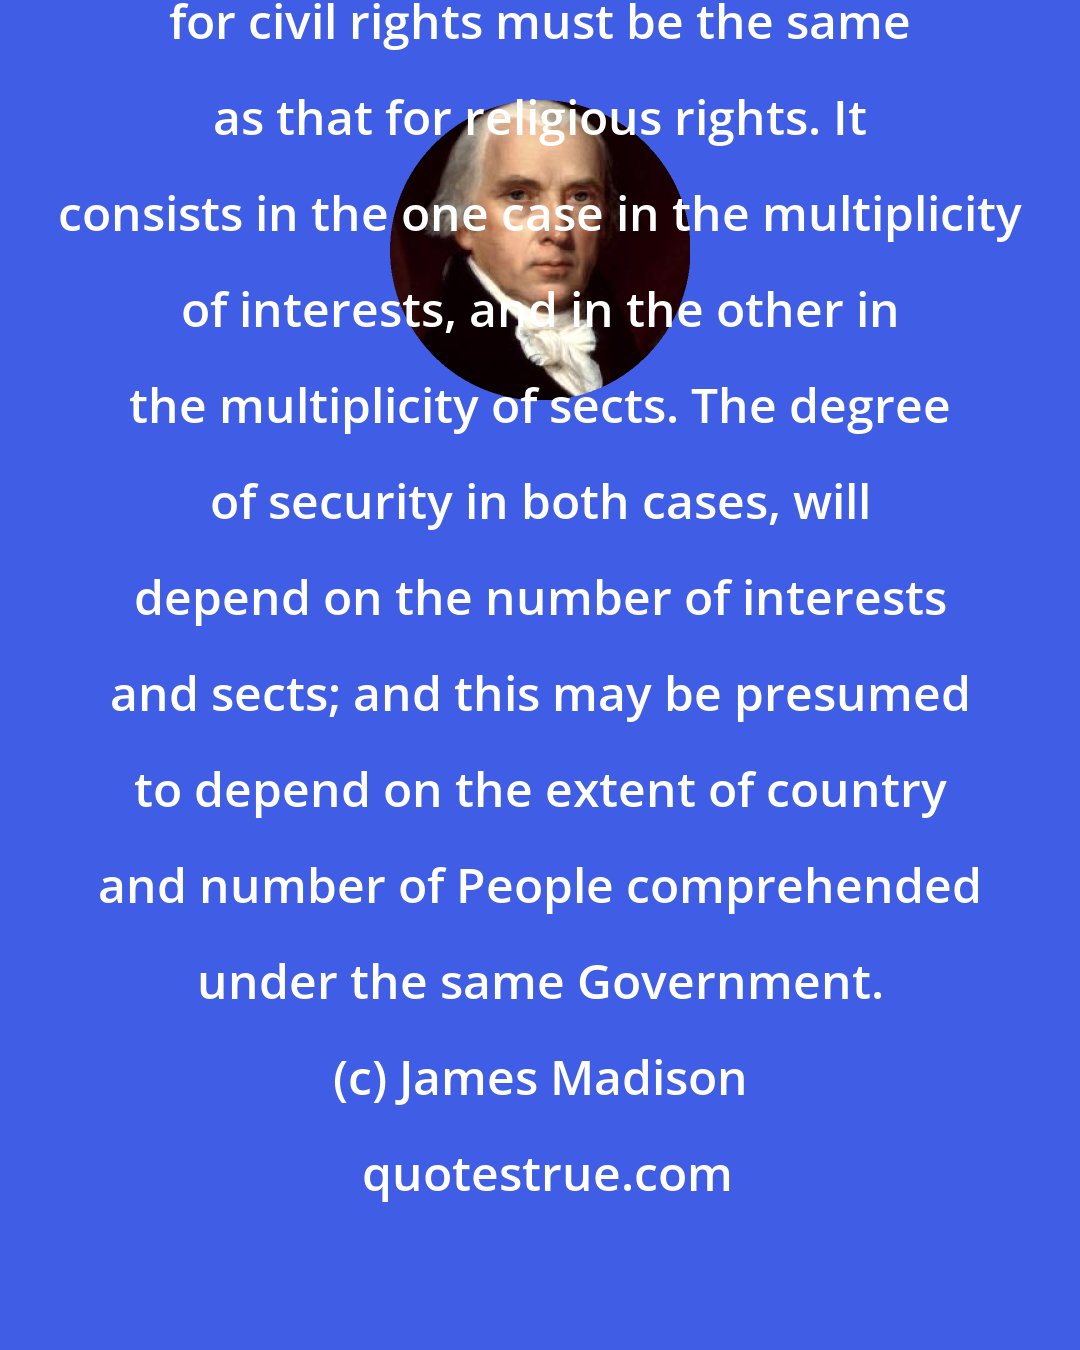 James Madison: In a free Government, the security for civil rights must be the same as that for religious rights. It consists in the one case in the multiplicity of interests, and in the other in the multiplicity of sects. The degree of security in both cases, will depend on the number of interests and sects; and this may be presumed to depend on the extent of country and number of People comprehended under the same Government.